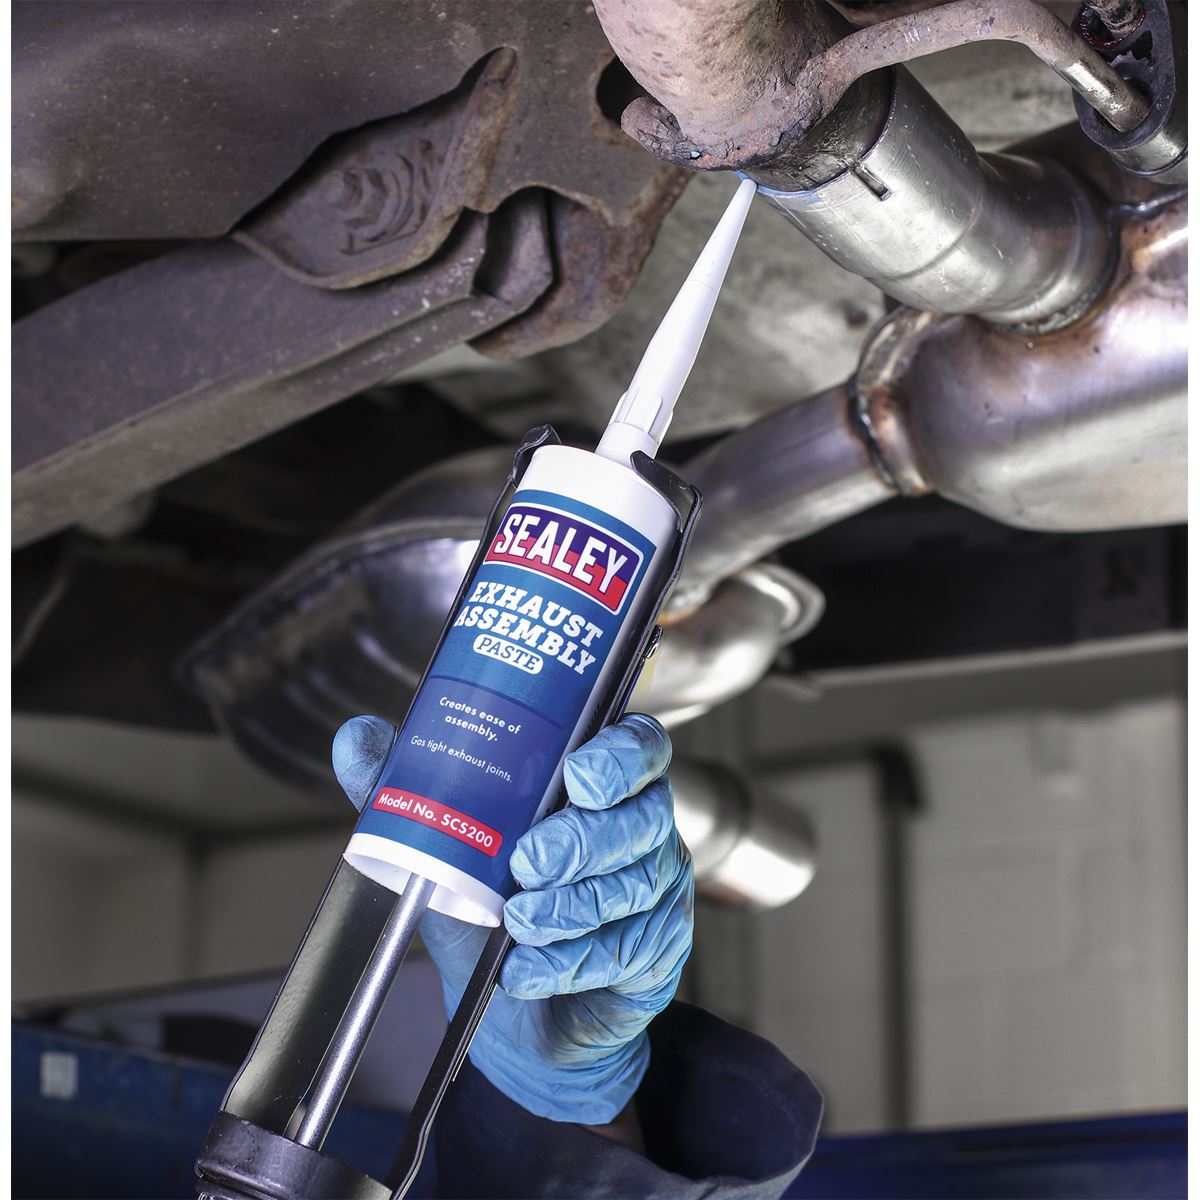 Sealey 150ml Exhaust Assembly Paste